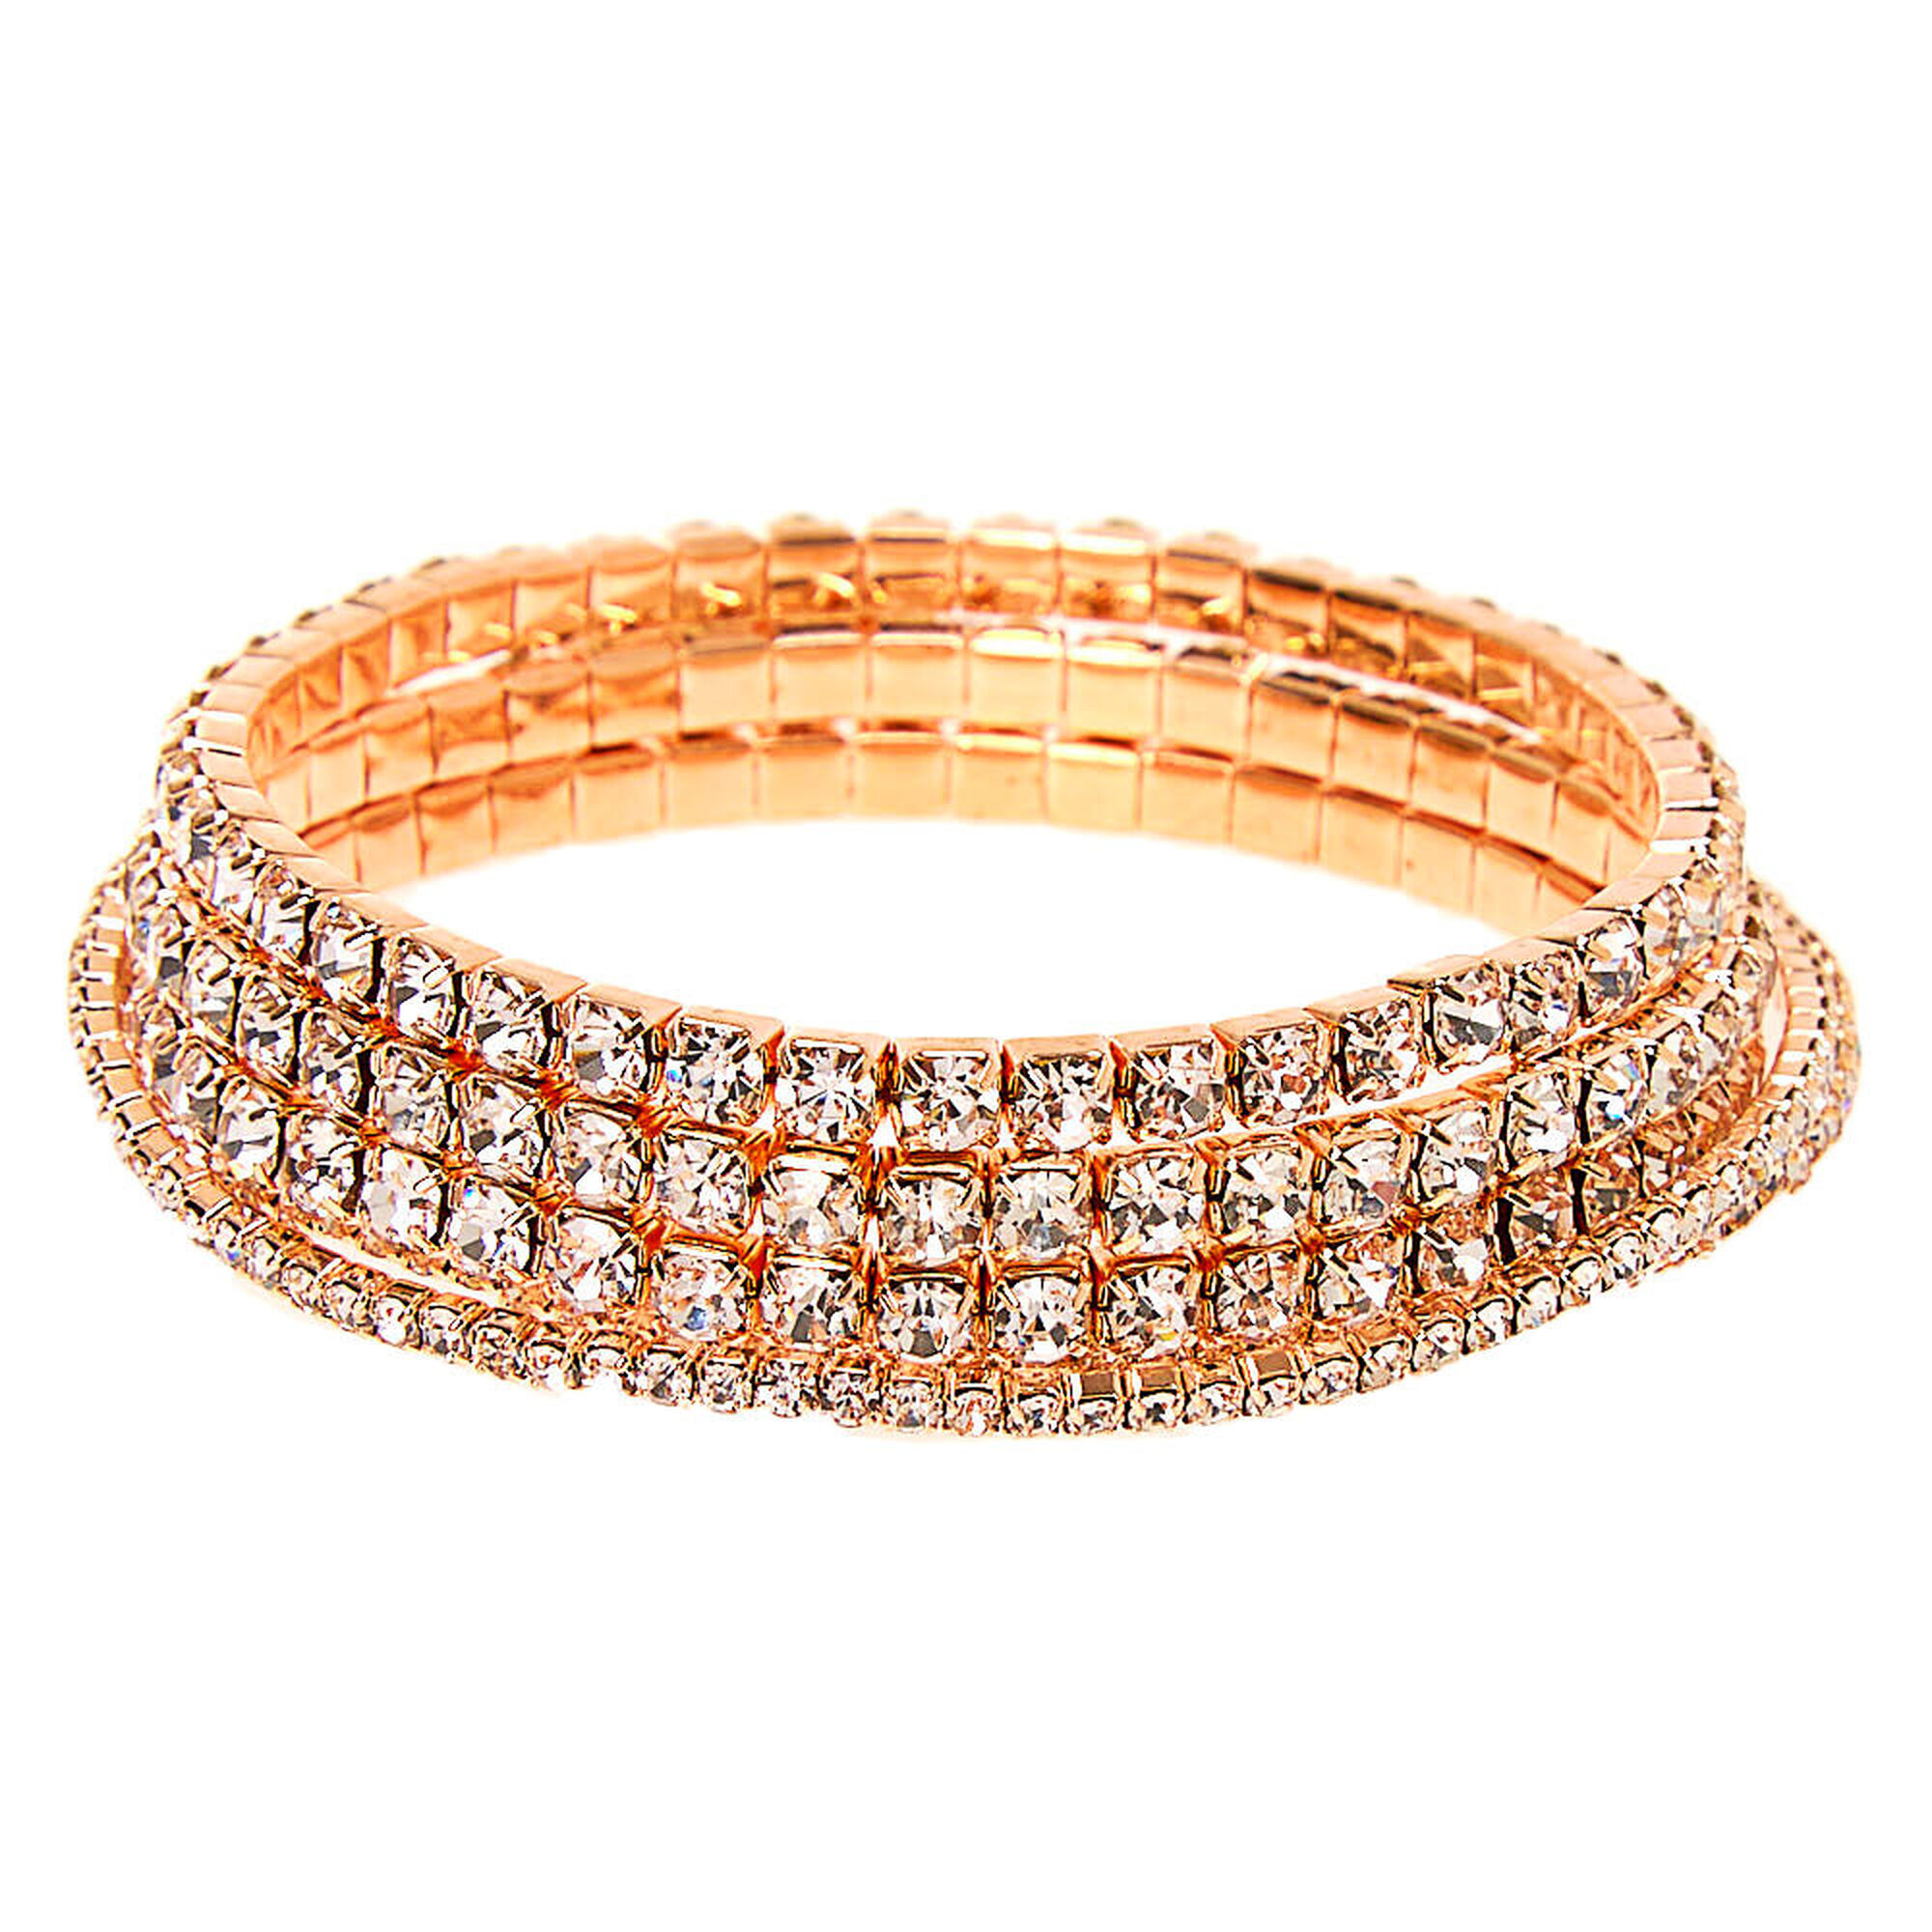 View Claires Tone Rhinestone Stretch Bracelets 5 Pack Rose Gold information